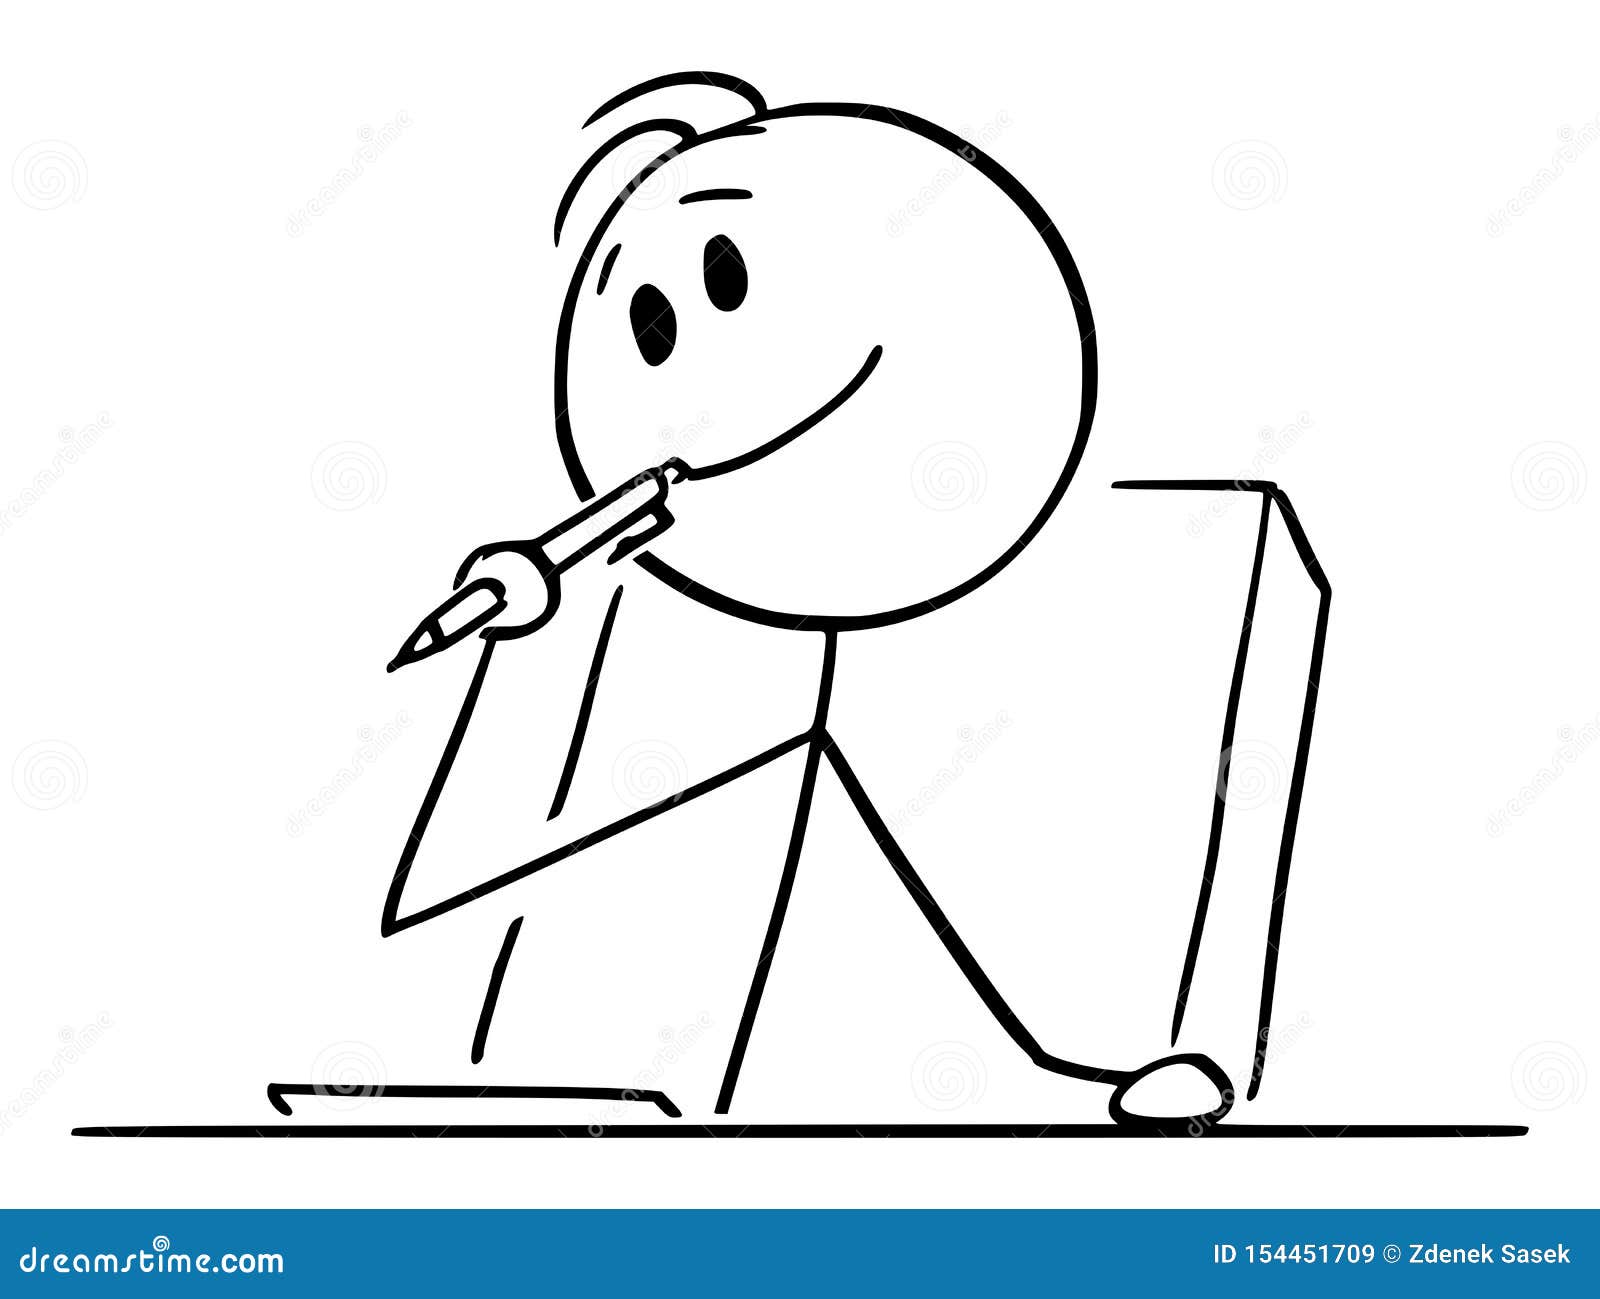  cartoon of creative man or businessman or writer thinking about something with ballpoint pen in mouth